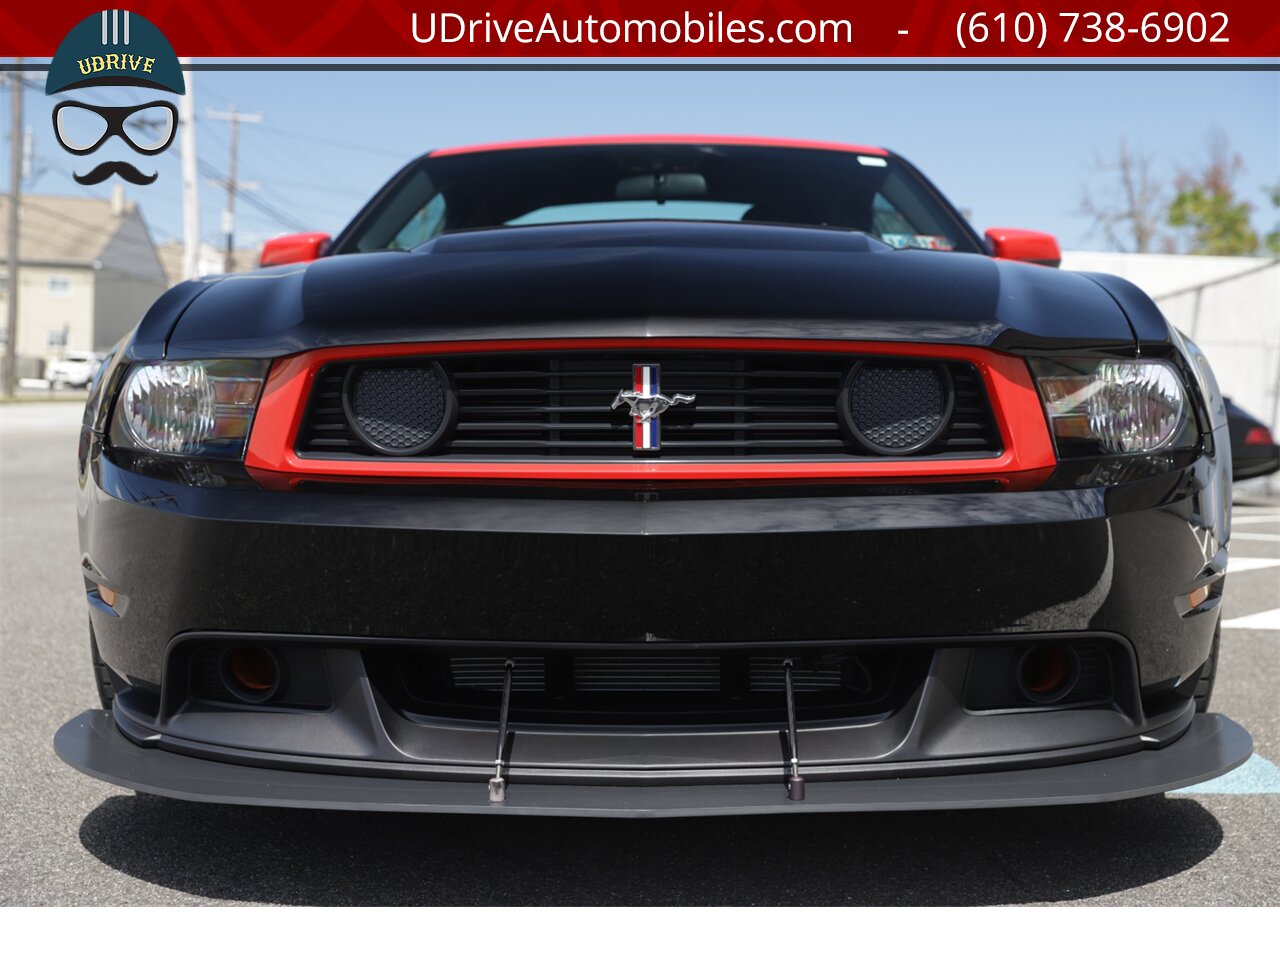 2012 Ford Mustang 866 Miles Boss 302 Laguna Seca #338 of 750  Red TracKey Activated - Photo 13 - West Chester, PA 19382